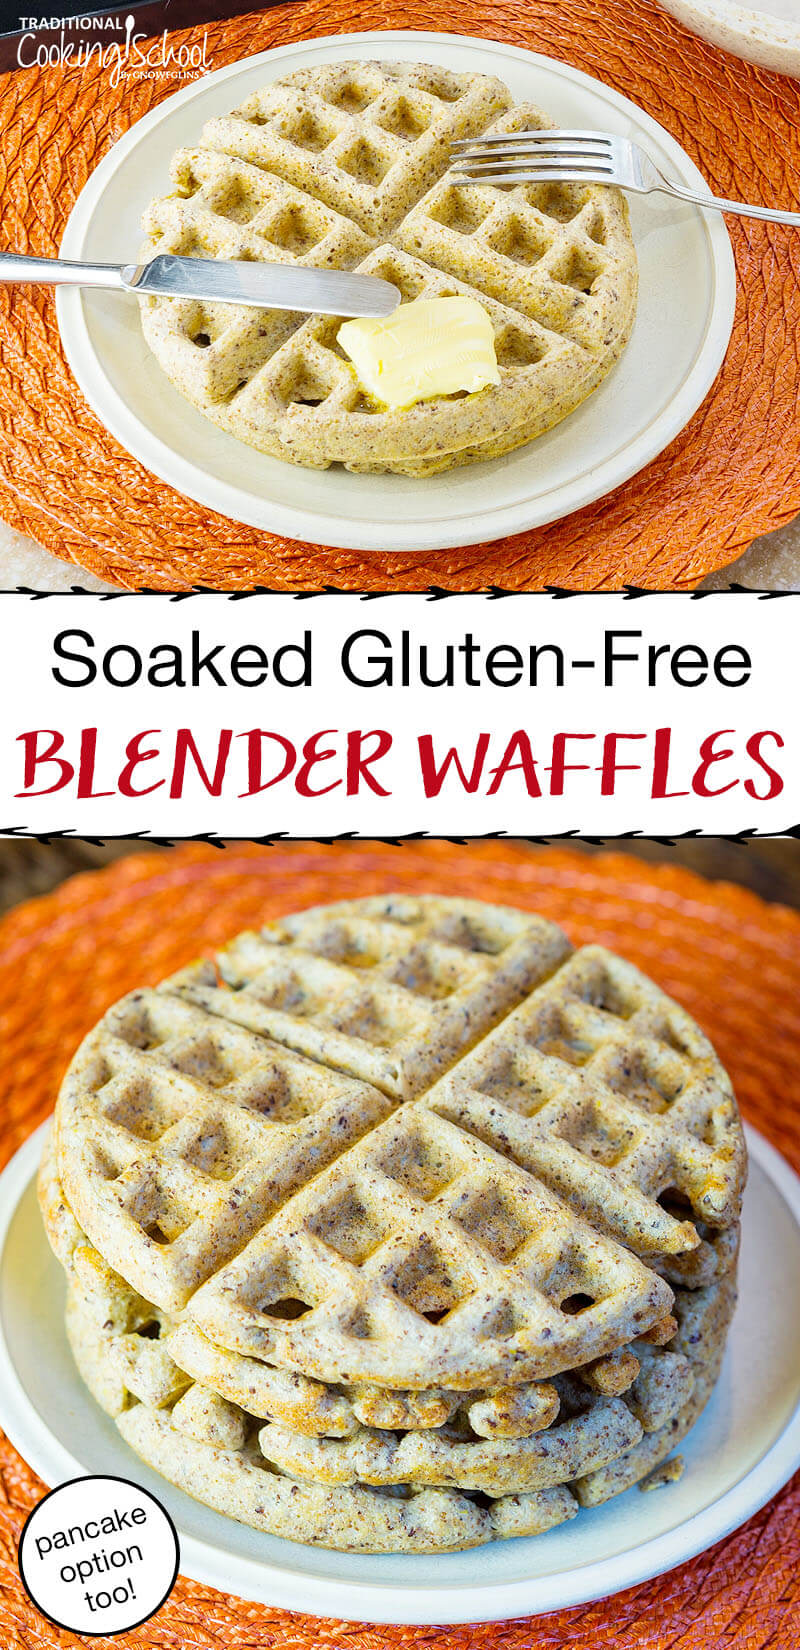 photo collage of a plate of Belgian waffles on an orange place mat, light-colored and fluffy, with a pat of butter and silverware, and text overlay: "Soaked Gluten-Free Blender Waffles (pancake option too!)"